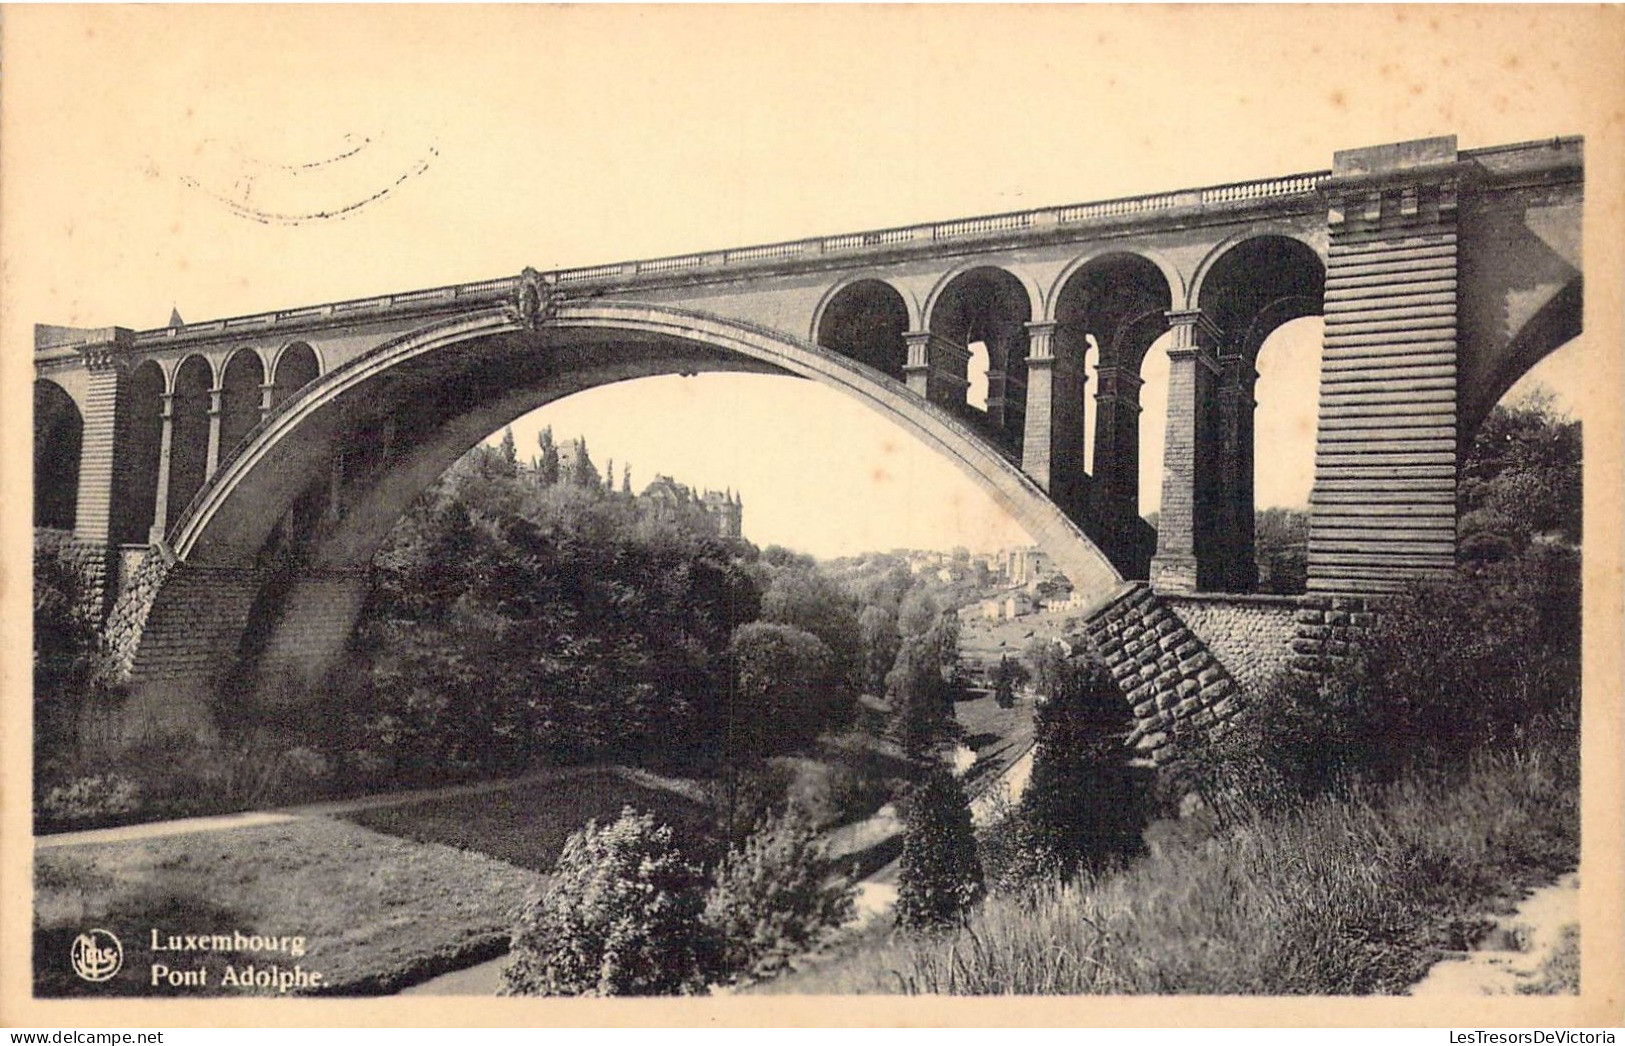 LUXEMBOURG - Ville - Pont Adolphe - Carte Postale Ancienne - Luxemburg - Stad